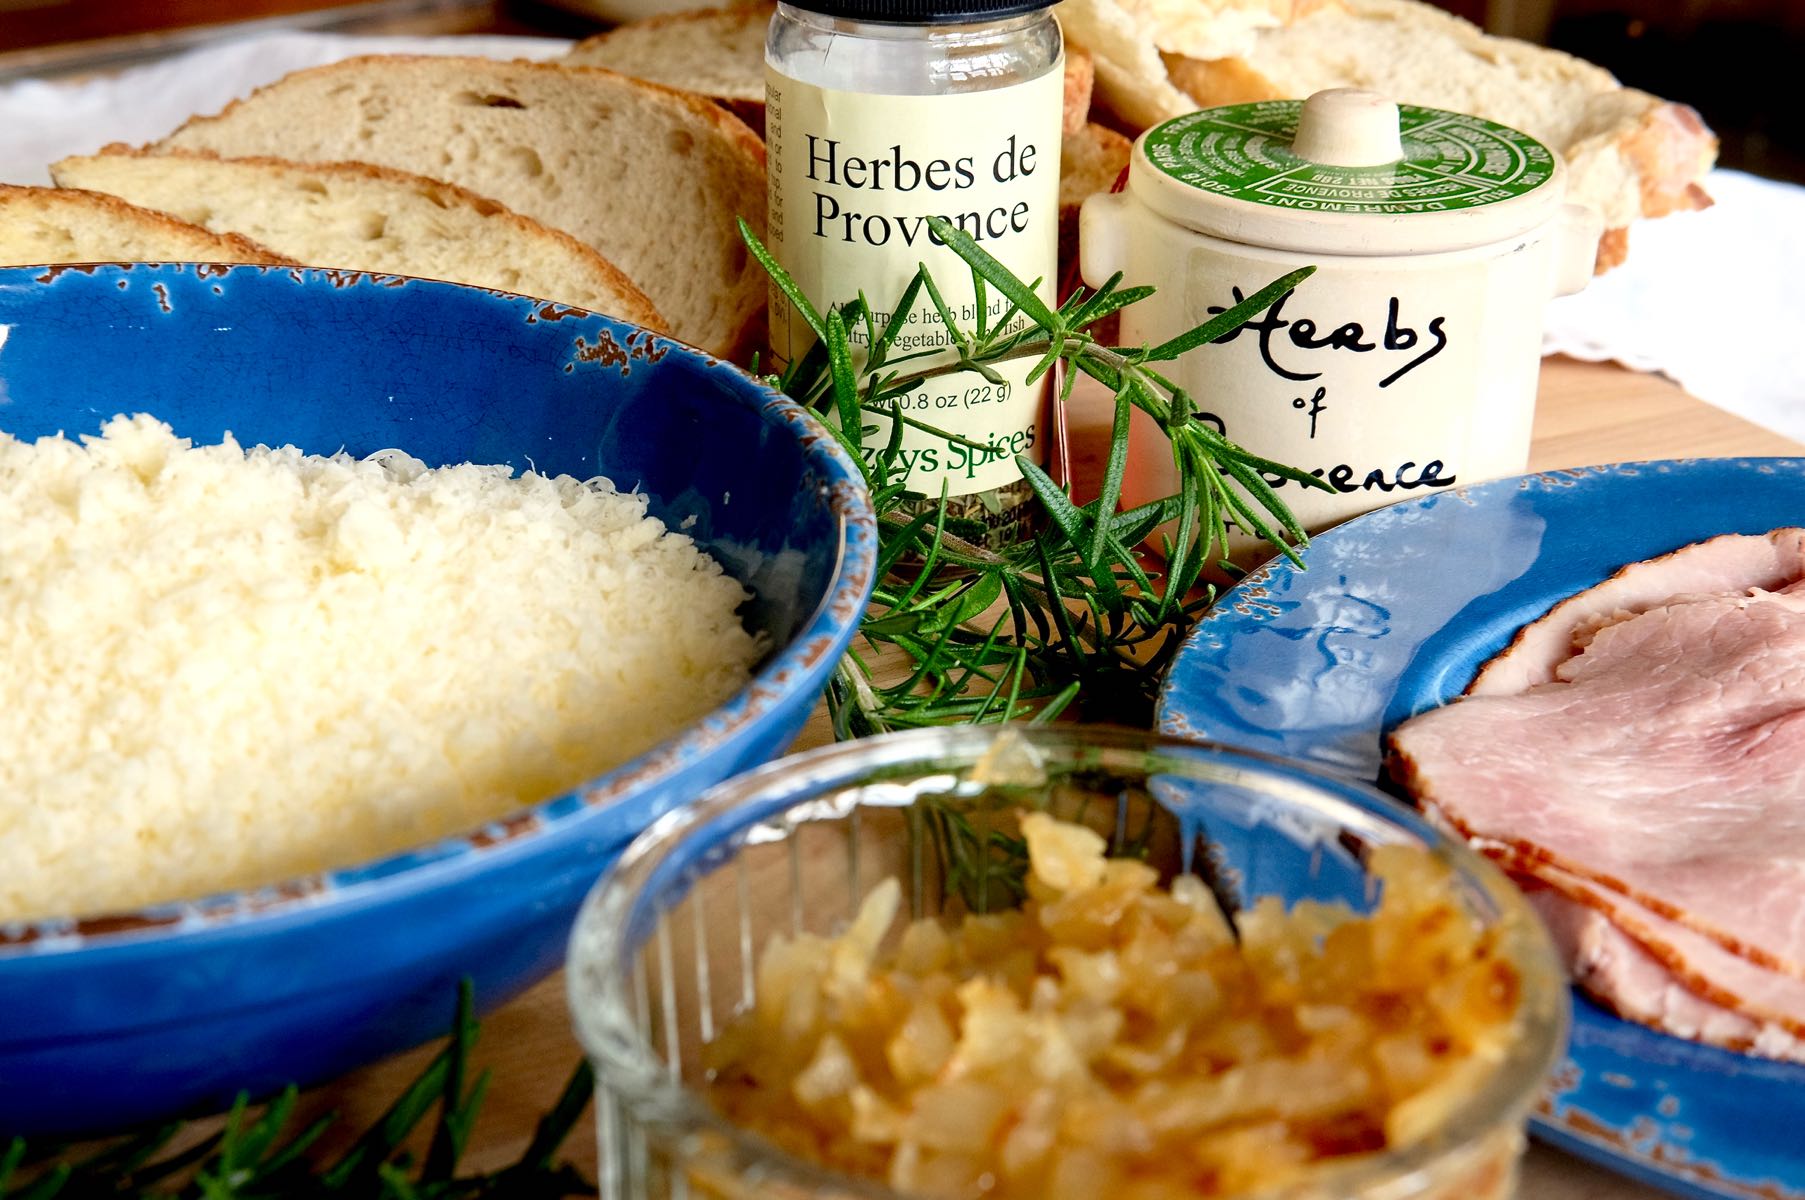 Ingredients: Gruyere cheese, caramelized onions, Herbes de Provence, sliced bread and a dish of ham